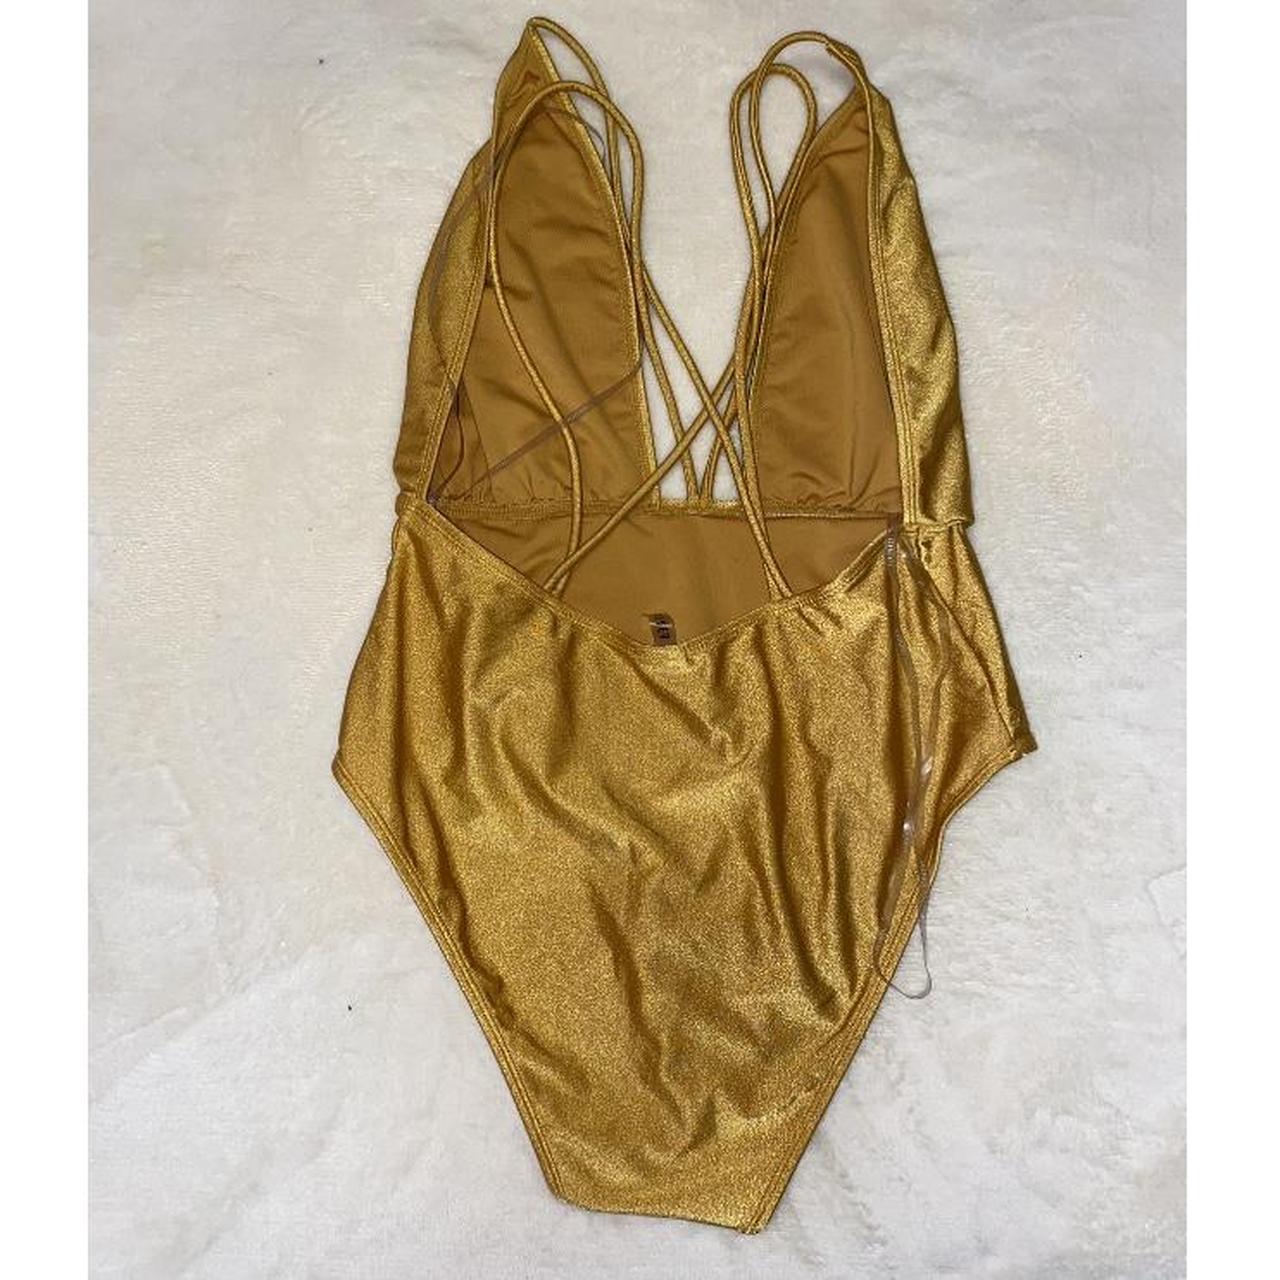 FOREVER 21 GOLD ONE PIECE SWIMSUIT 🏖️ gold stringy... - Depop